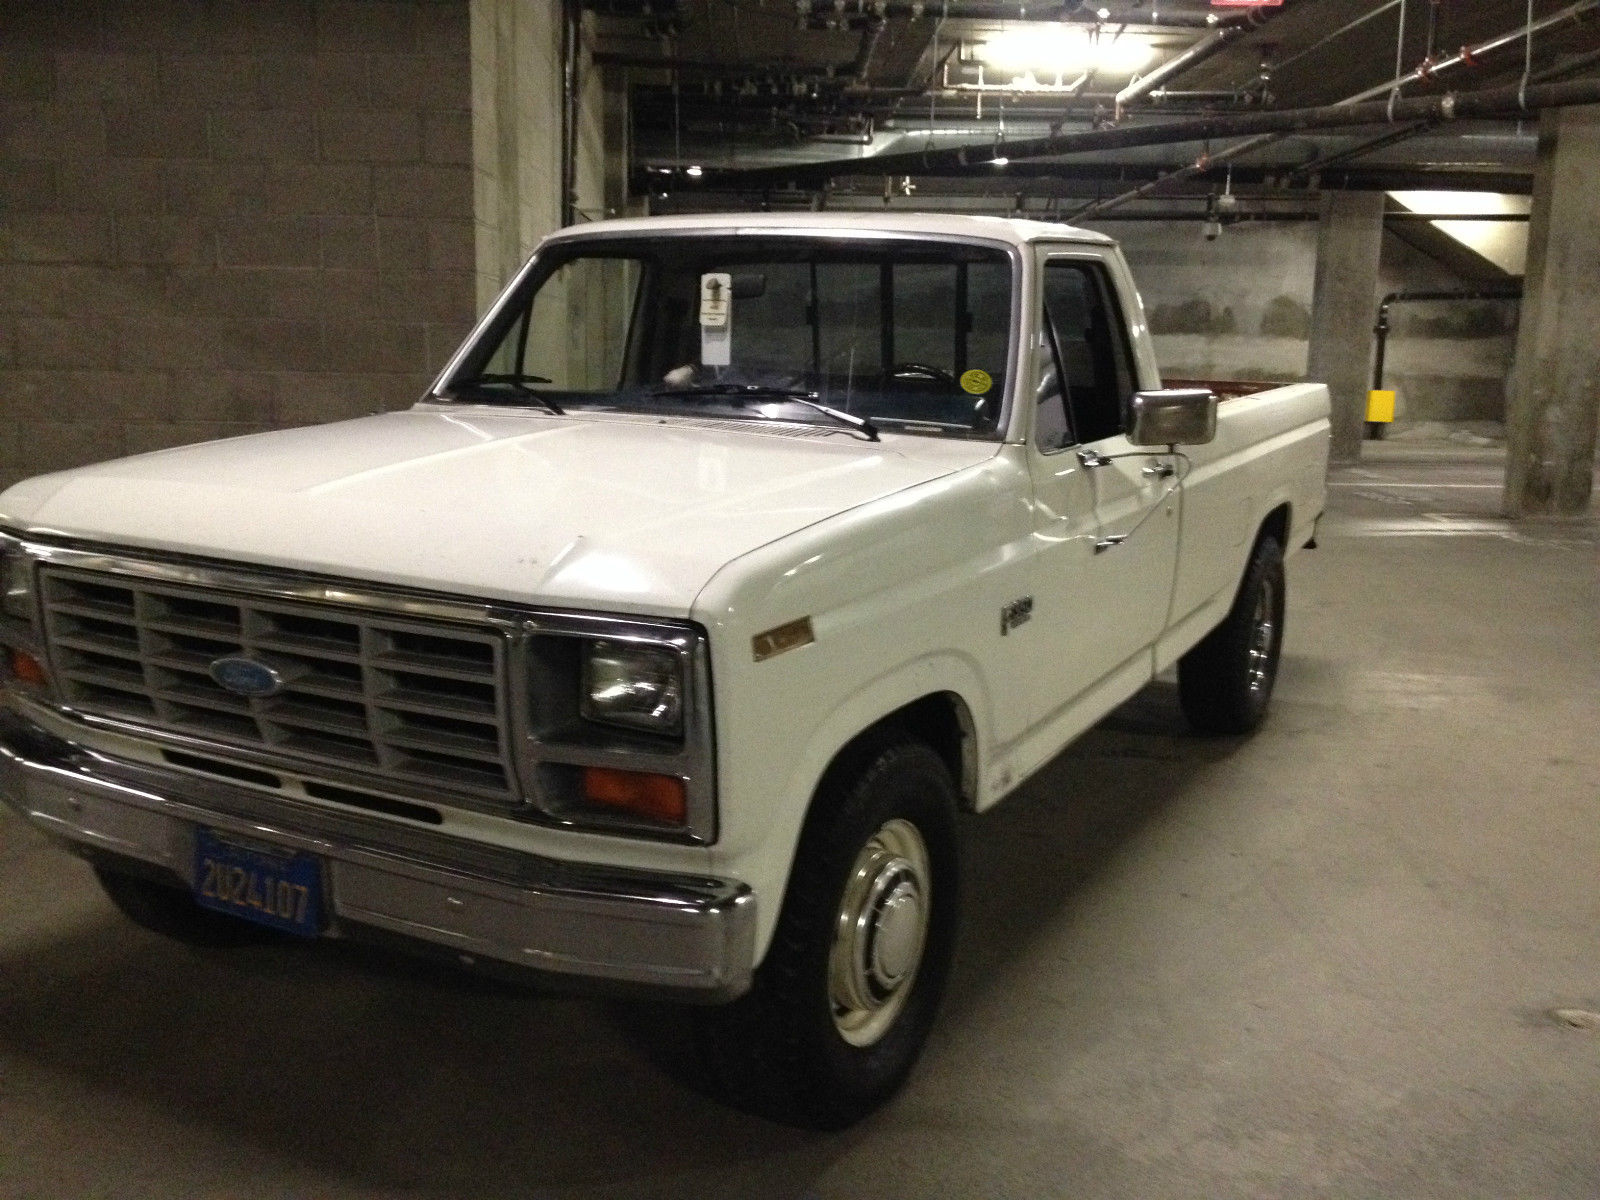 1984 Ford F-350